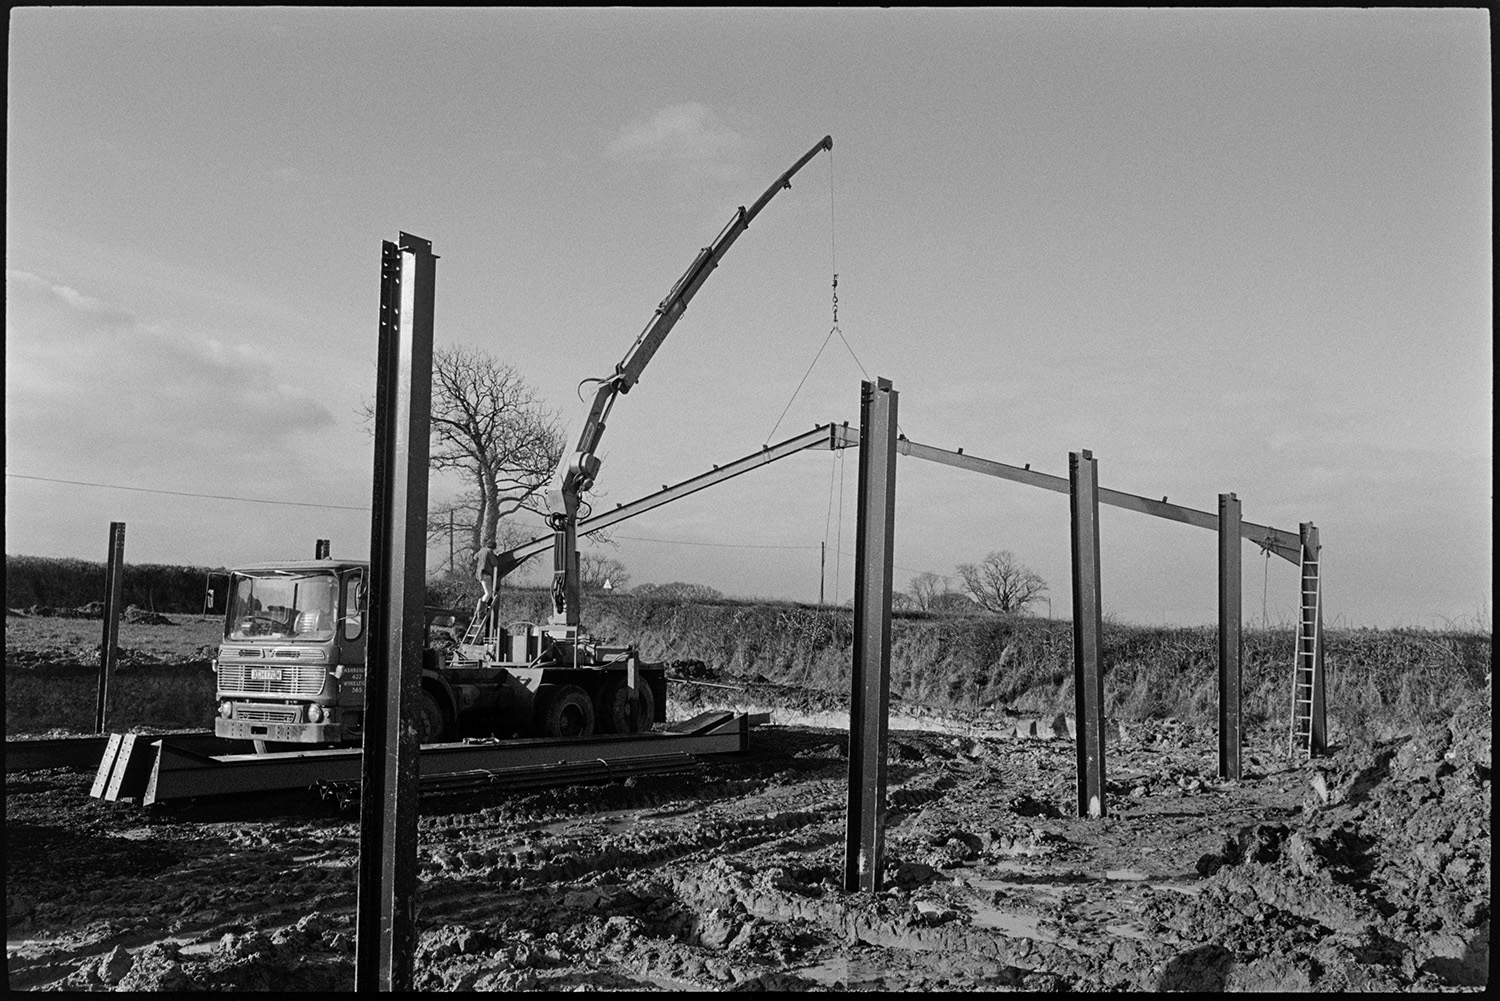 Crane erecting new barn in field. 
[A crane putting up the metal frame of a barn in a muddy field in Ashreigney. A person is up a ladder fixing the frame together on the far side of the barn.]